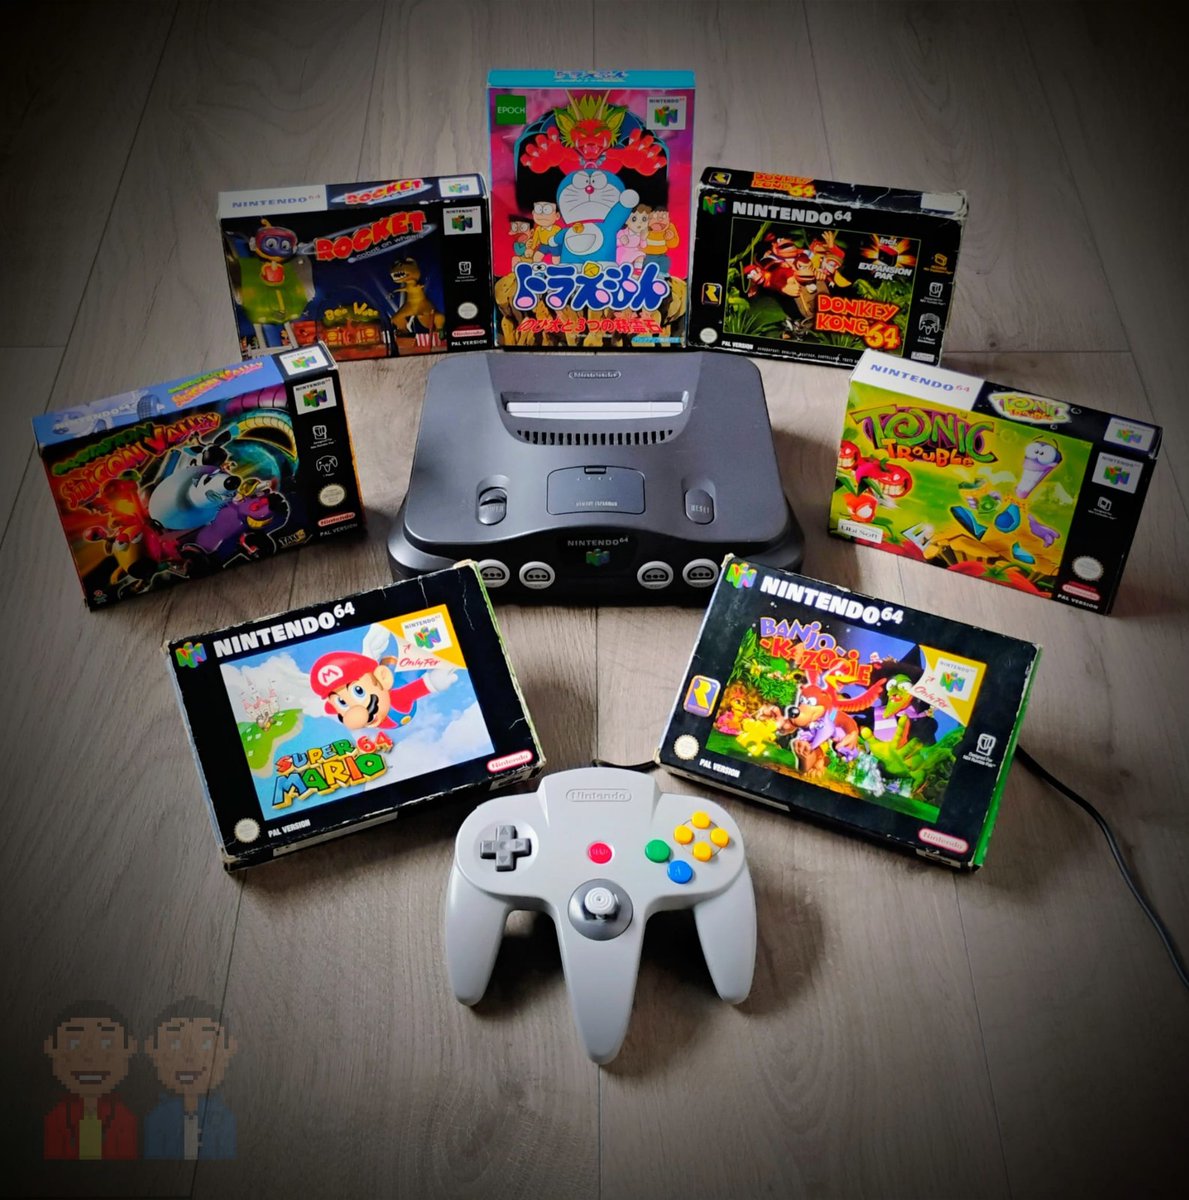 #Nintendo's 64 was known for changing the way we viewed 3d platformers for home console, so this #Wednesdayvibe we ask What are your favourite #3d platformers for #N64 #GamersUnite #RETROGAMING #retrogamer #retrogames #Retro